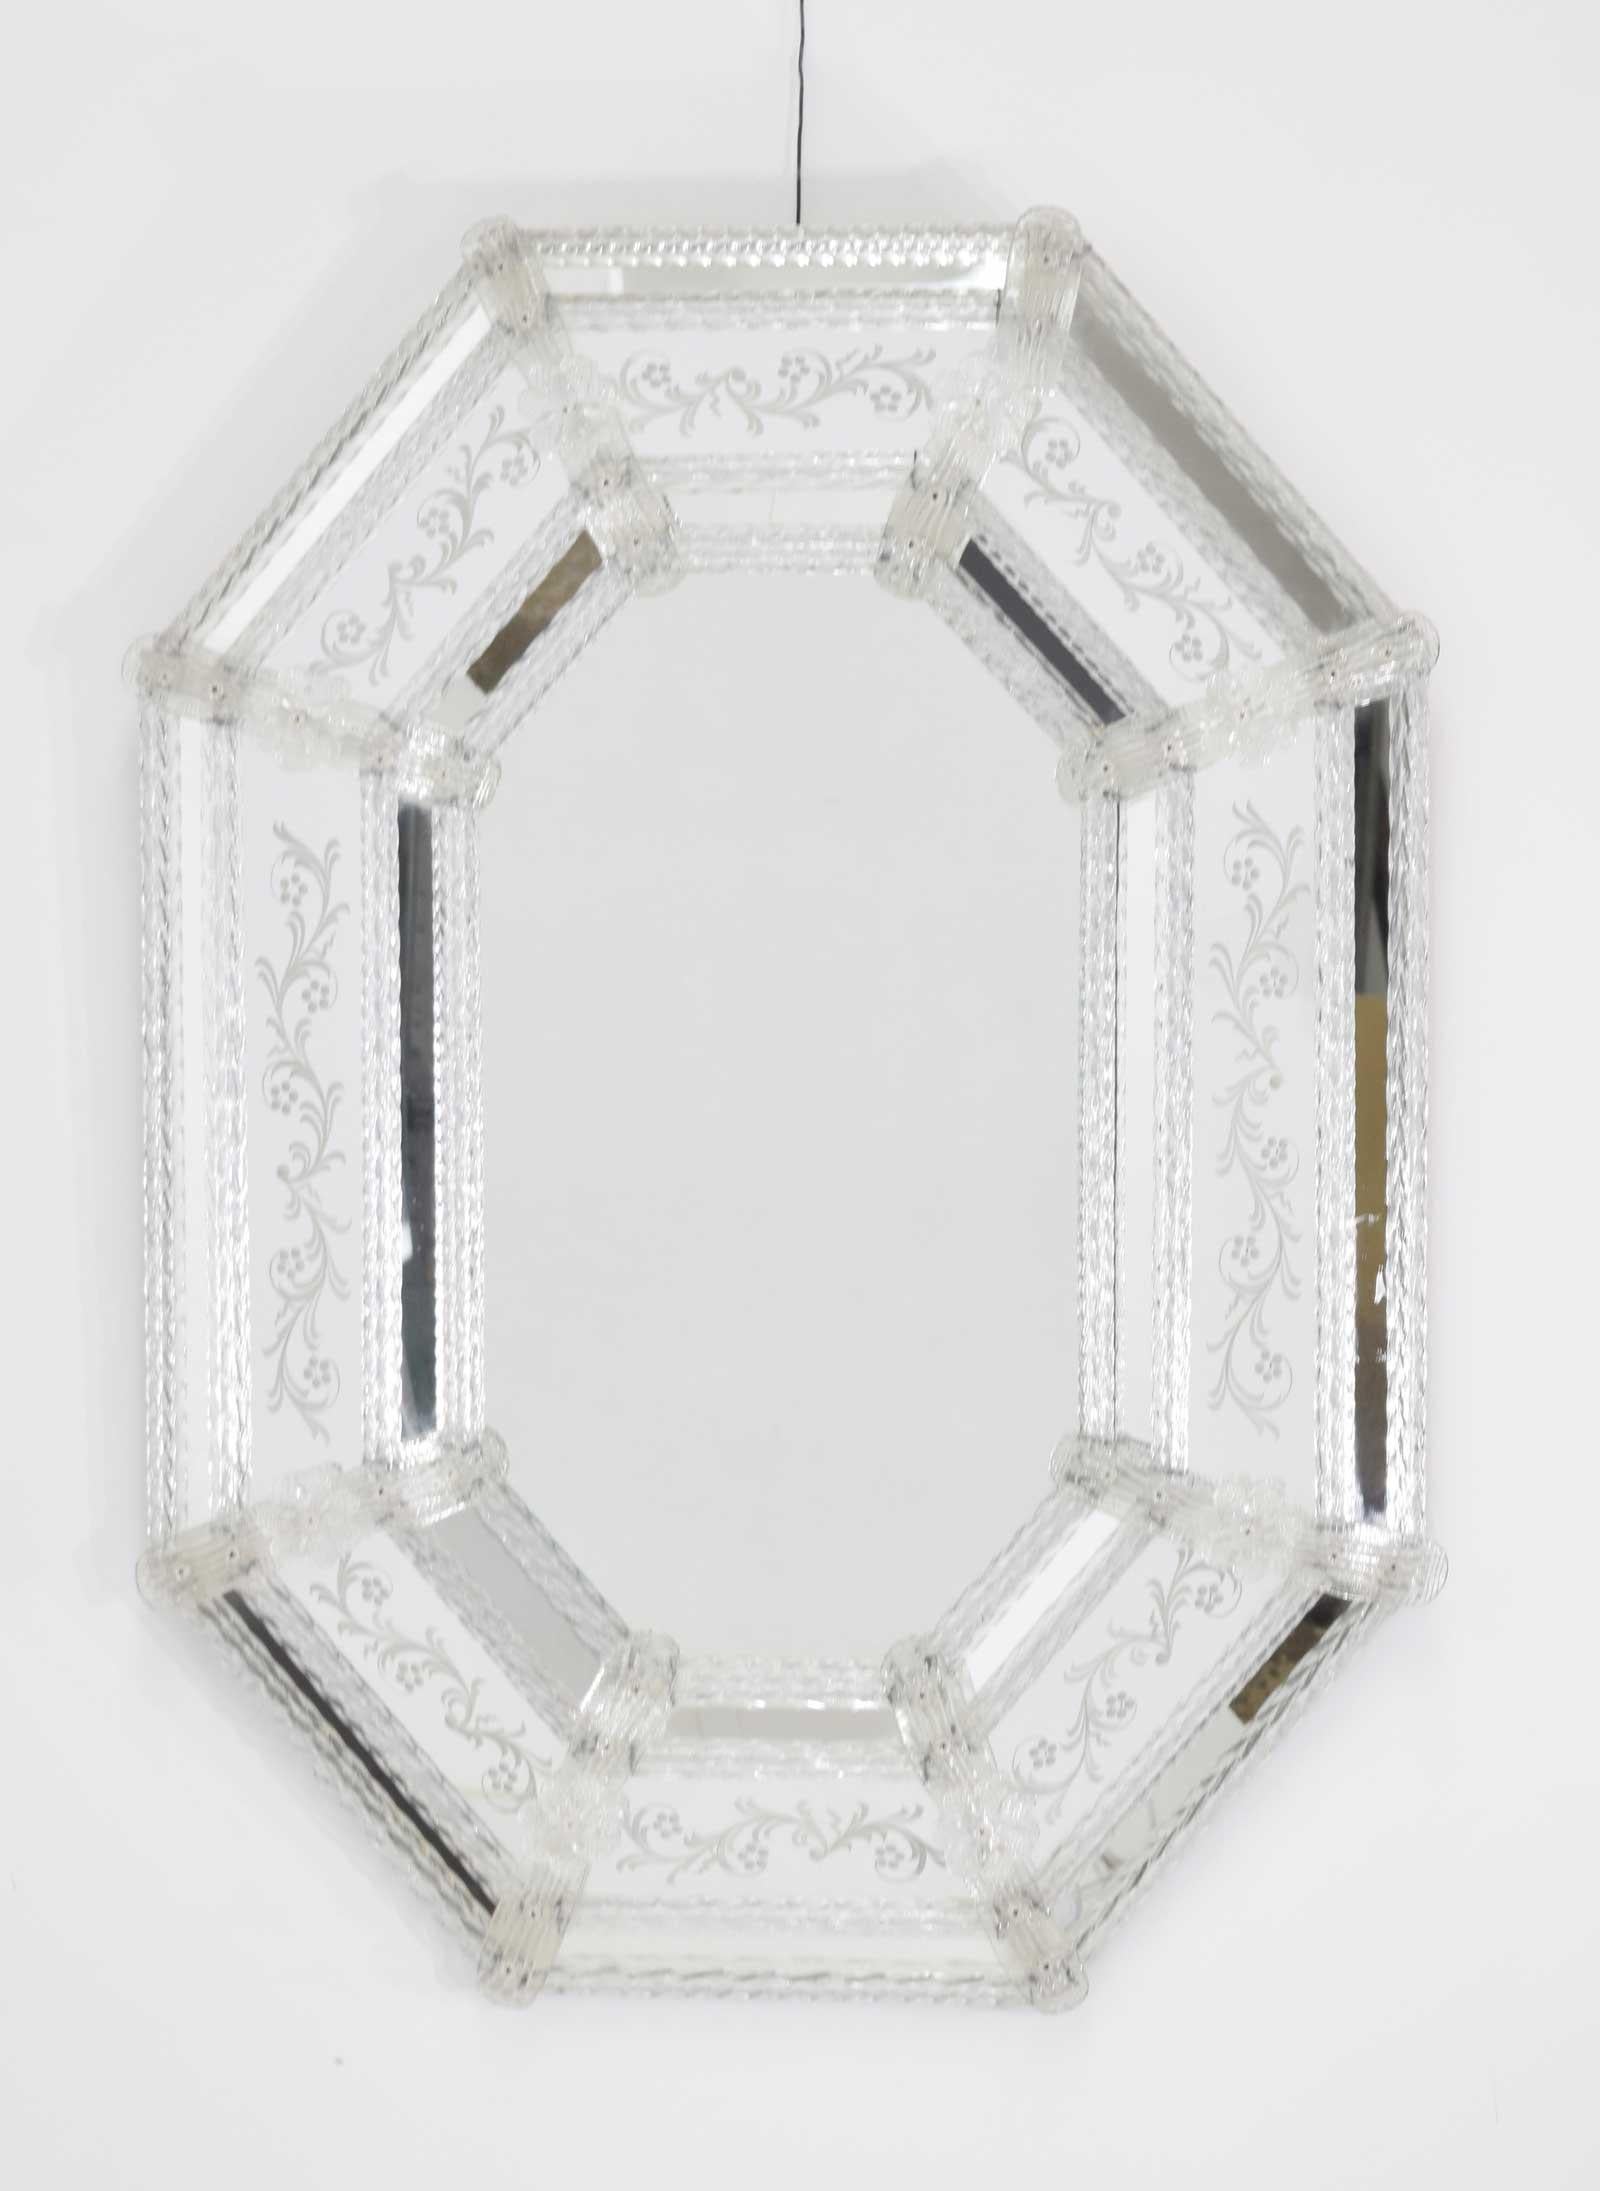 Stunning Venetian glass mirror with eight sides. Glass floral design, mirrored glass frames.